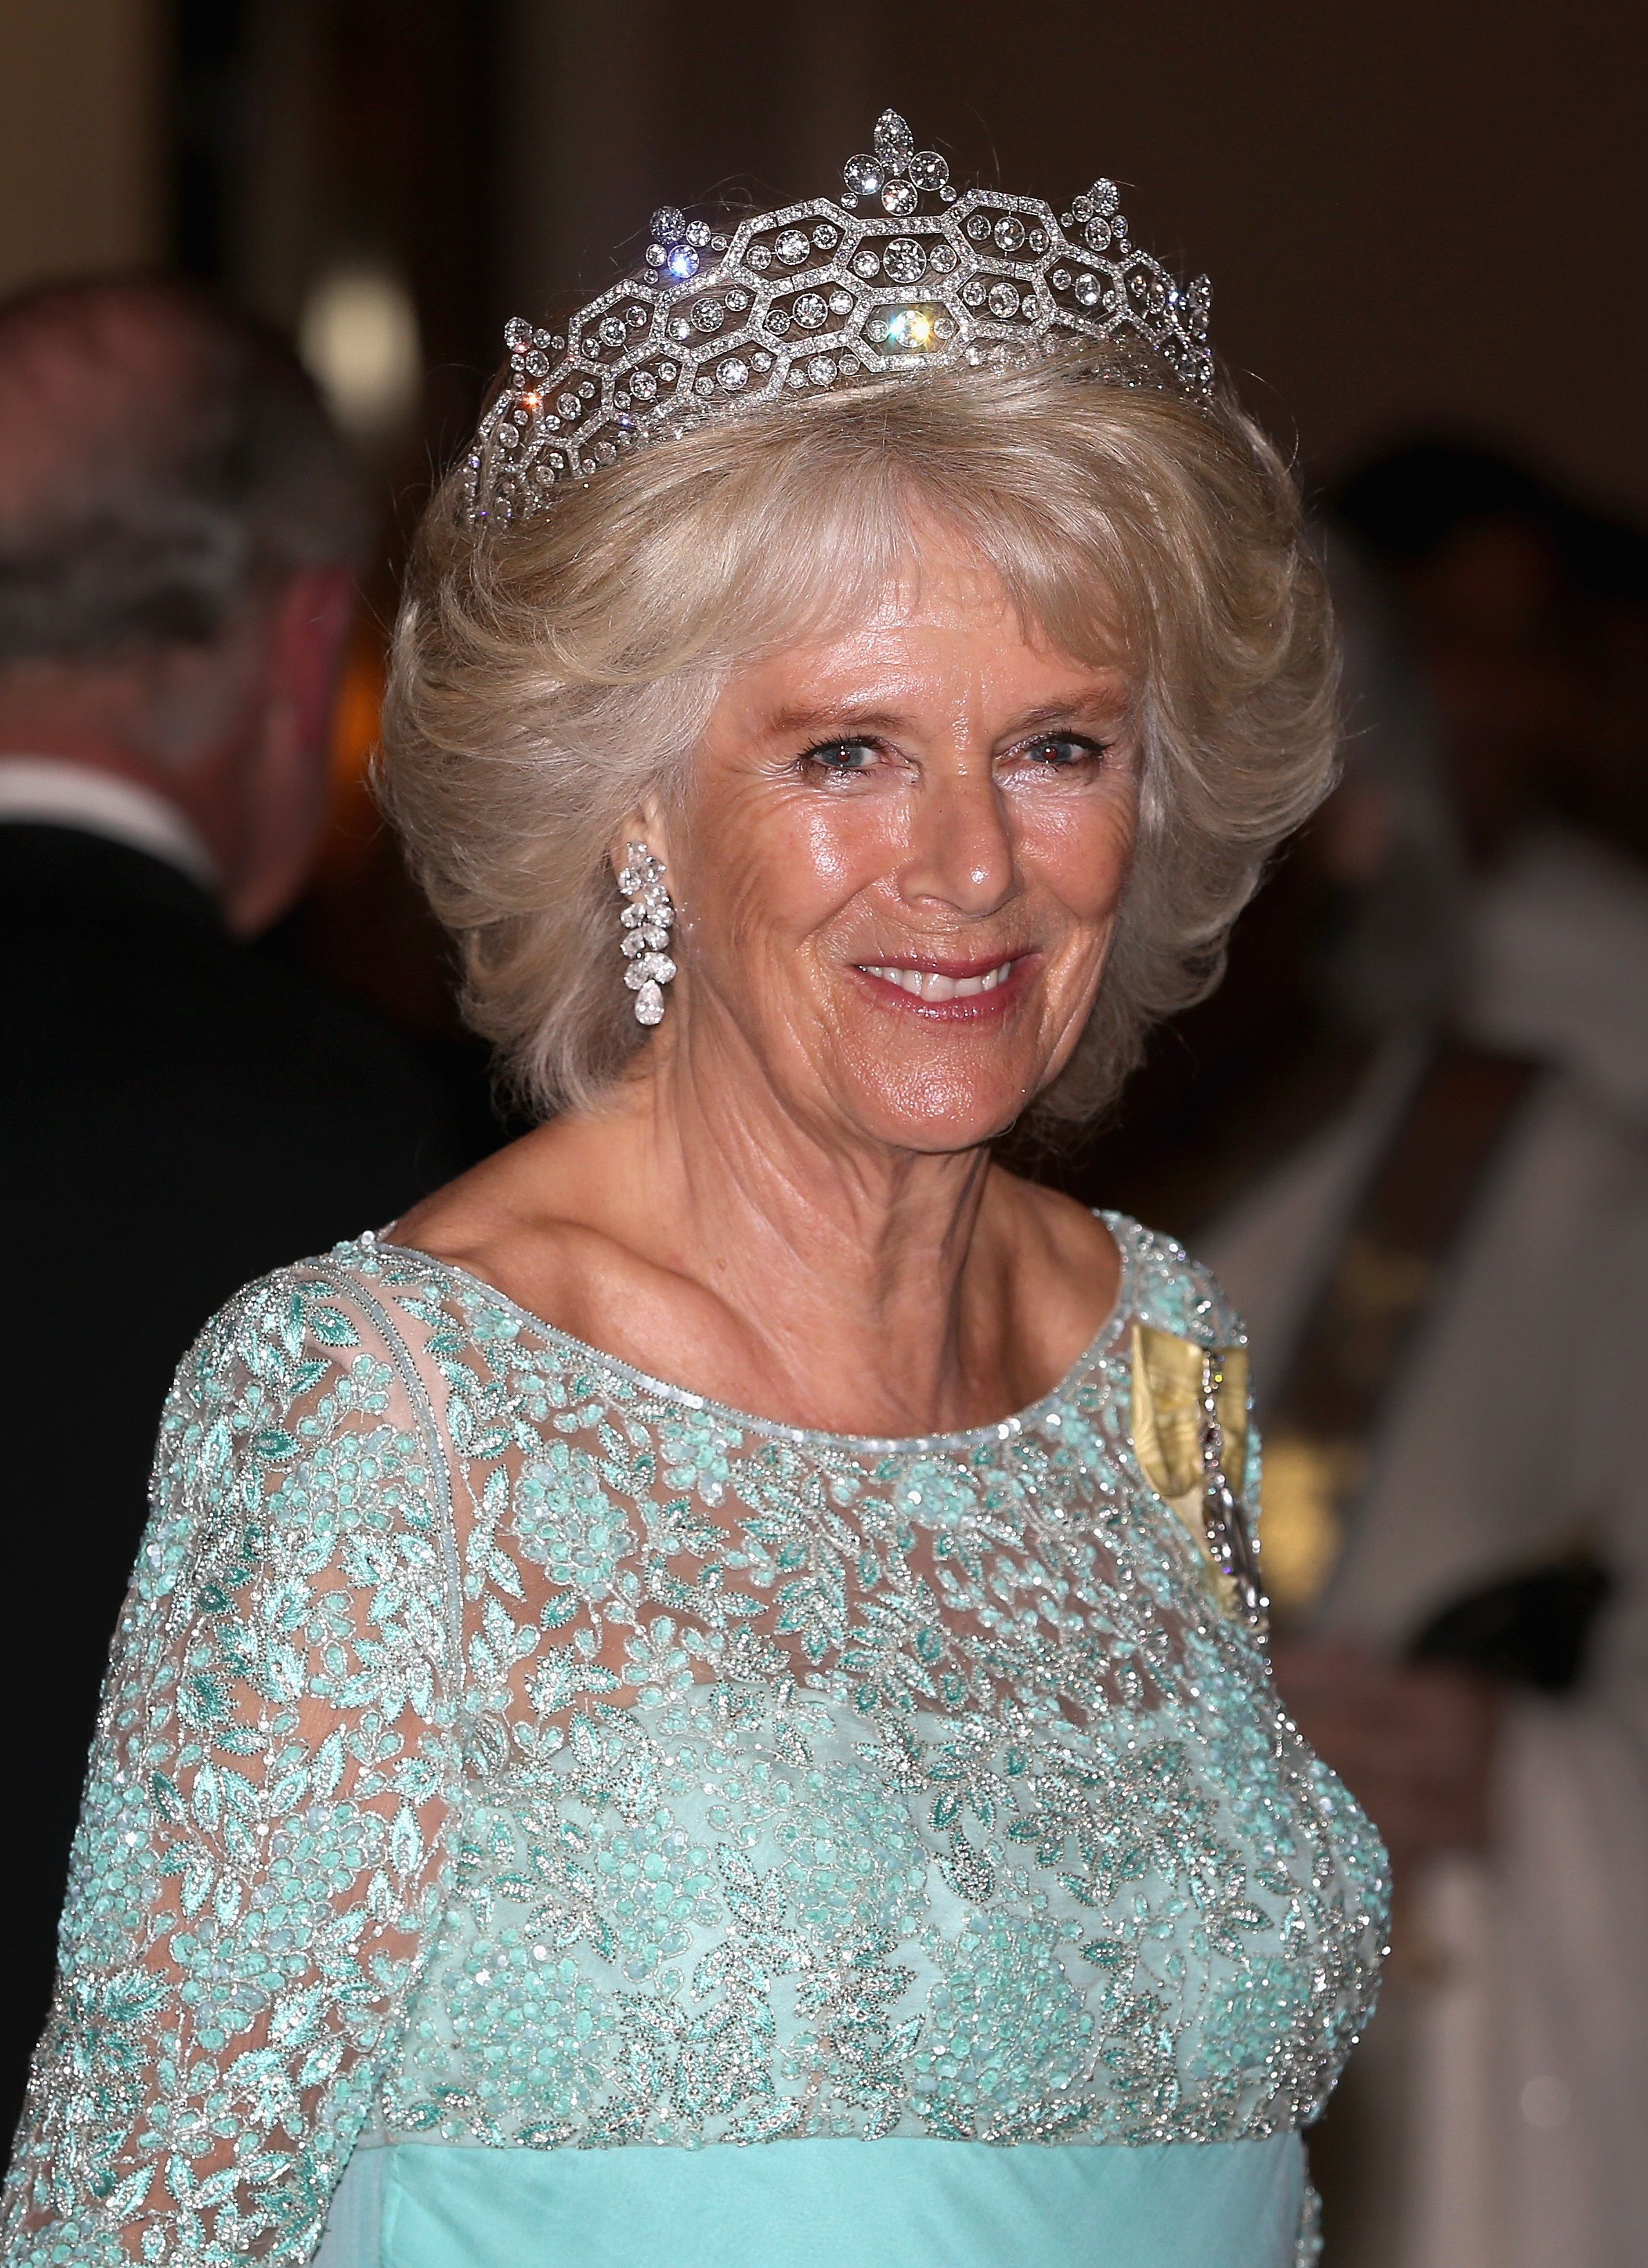 Duchess of Cornwall News, Articles, Stories & Trends for Today